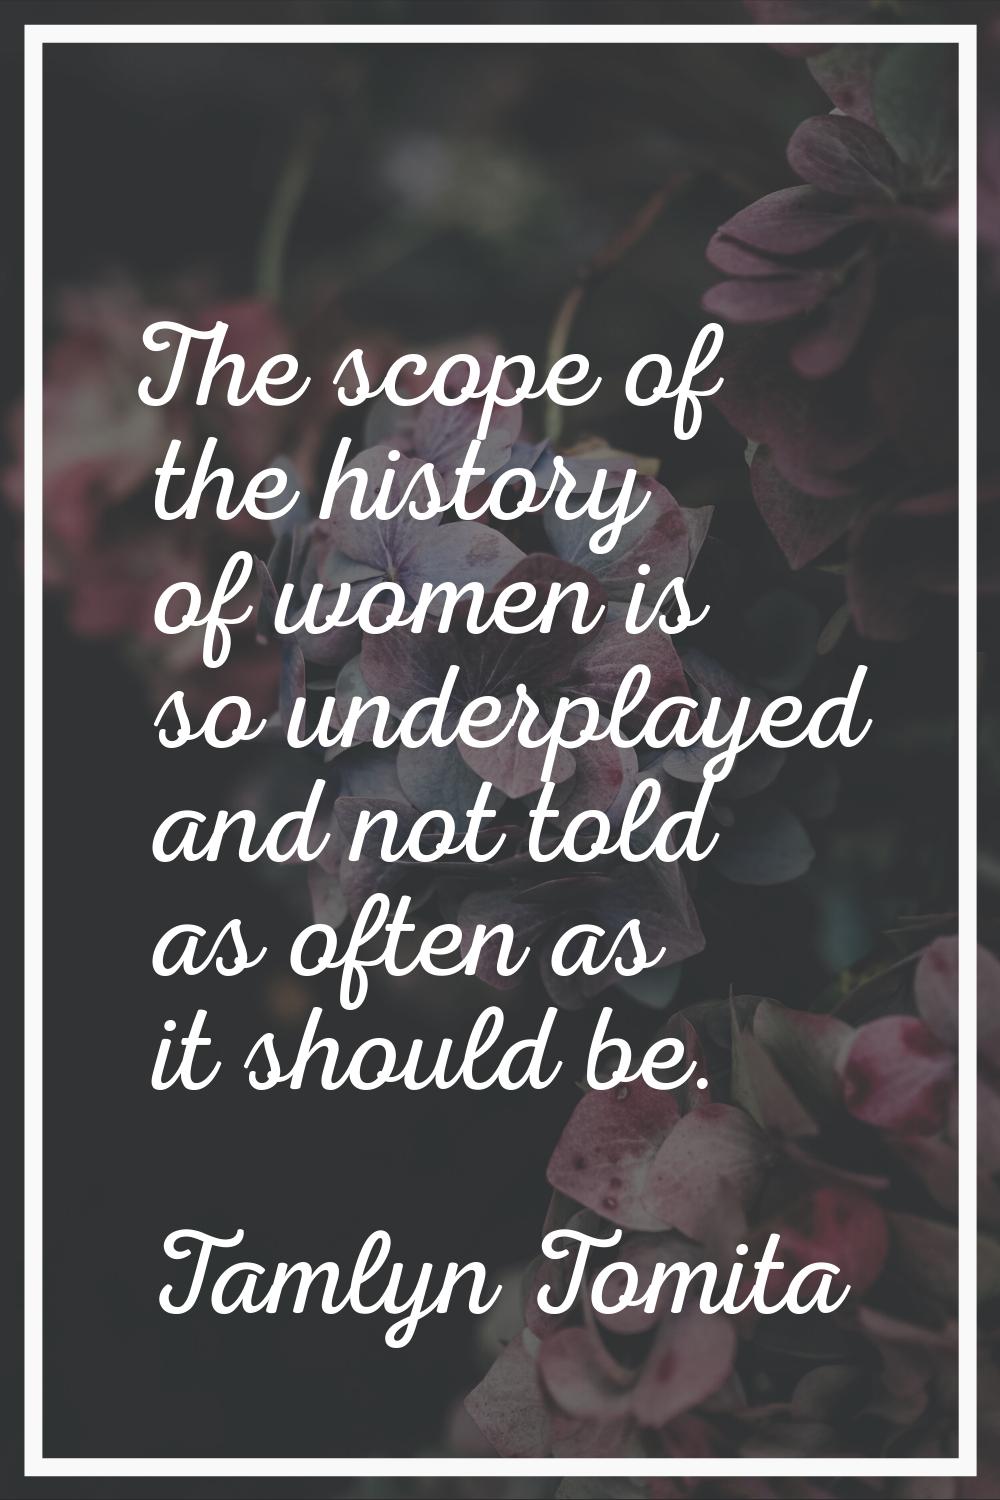 The scope of the history of women is so underplayed and not told as often as it should be.